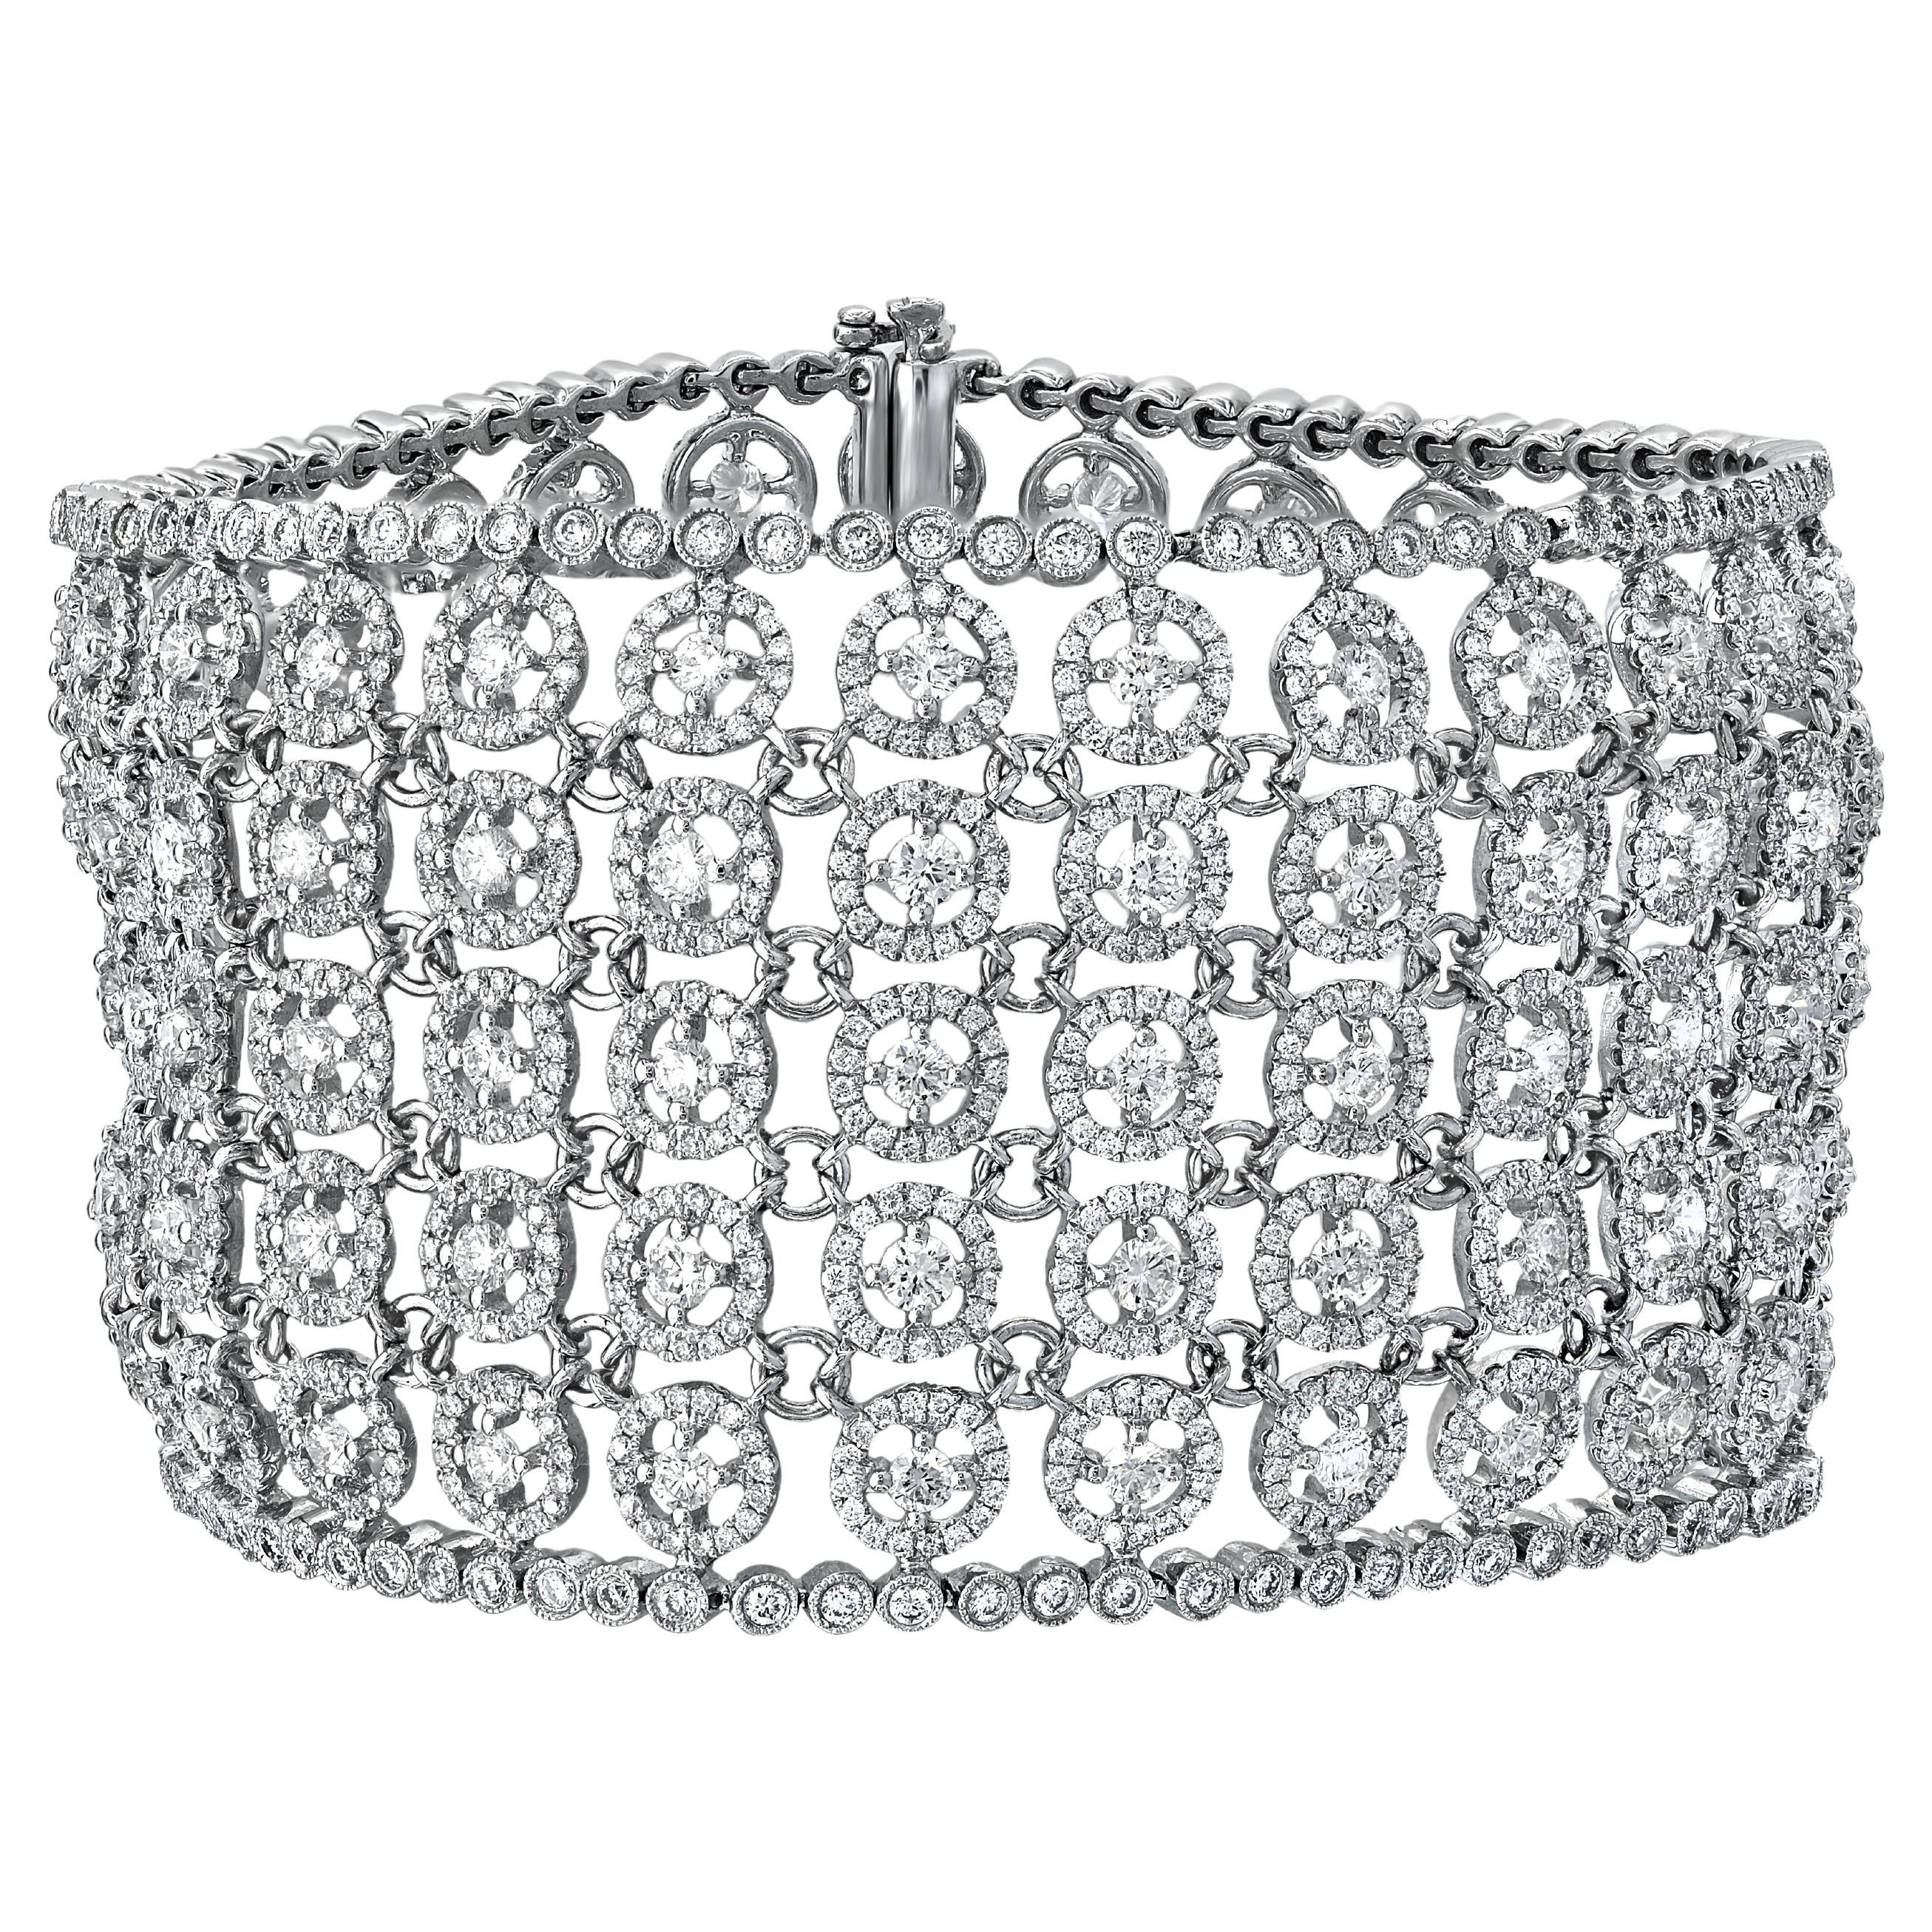 14.12 Carat Natural Diamond Lace Array Cuff Bracelet in 18k White Gold ref201 For Sale